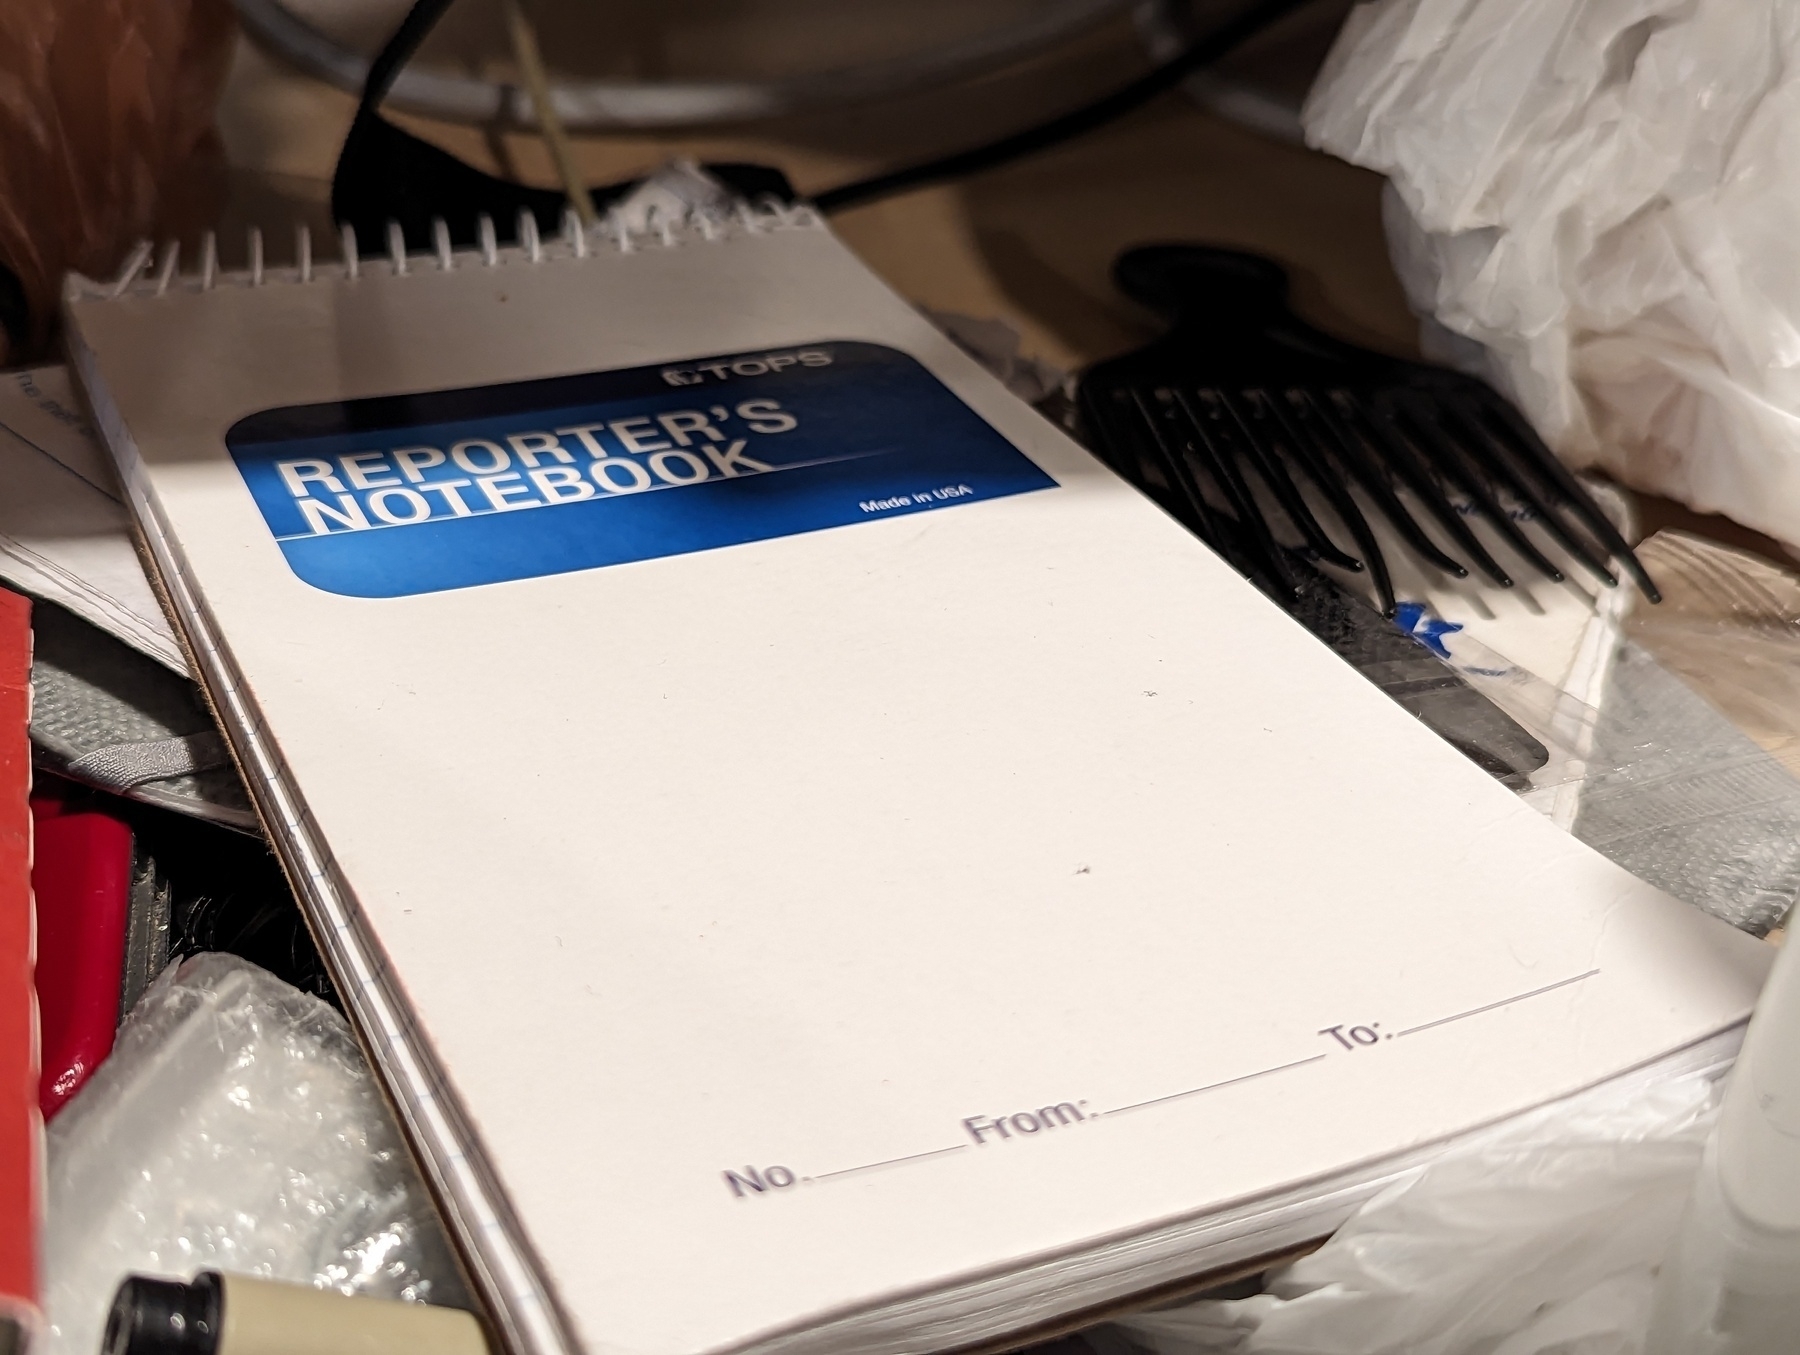 A slim white covered spiral bound reporters notebook sits next to a small black pick comb